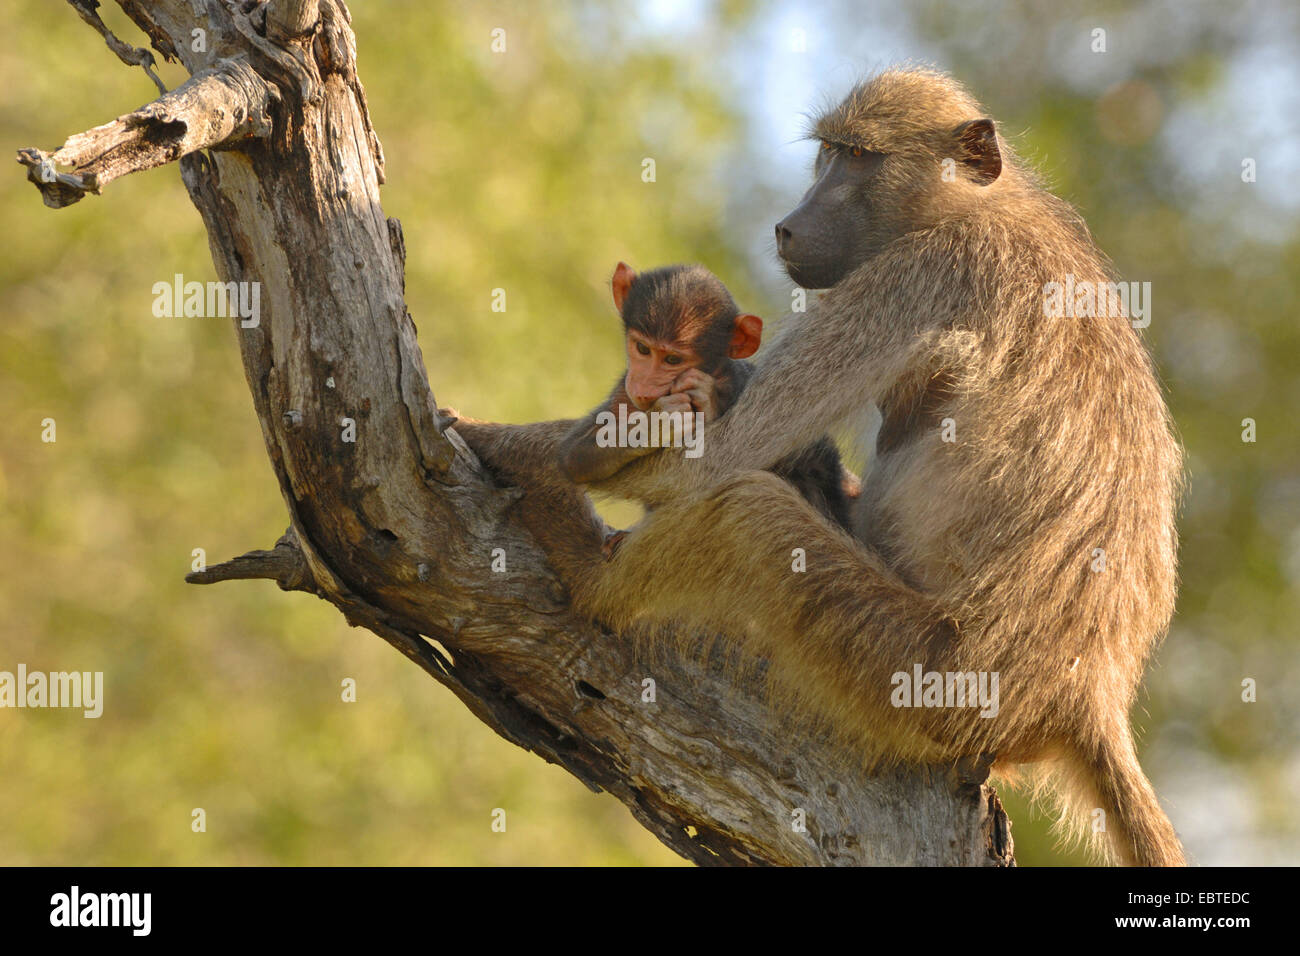 yellow baboon, savannah baboon (Papio cynocephalus), female sitting in an old gnarled tree with a juvenile Stock Photo